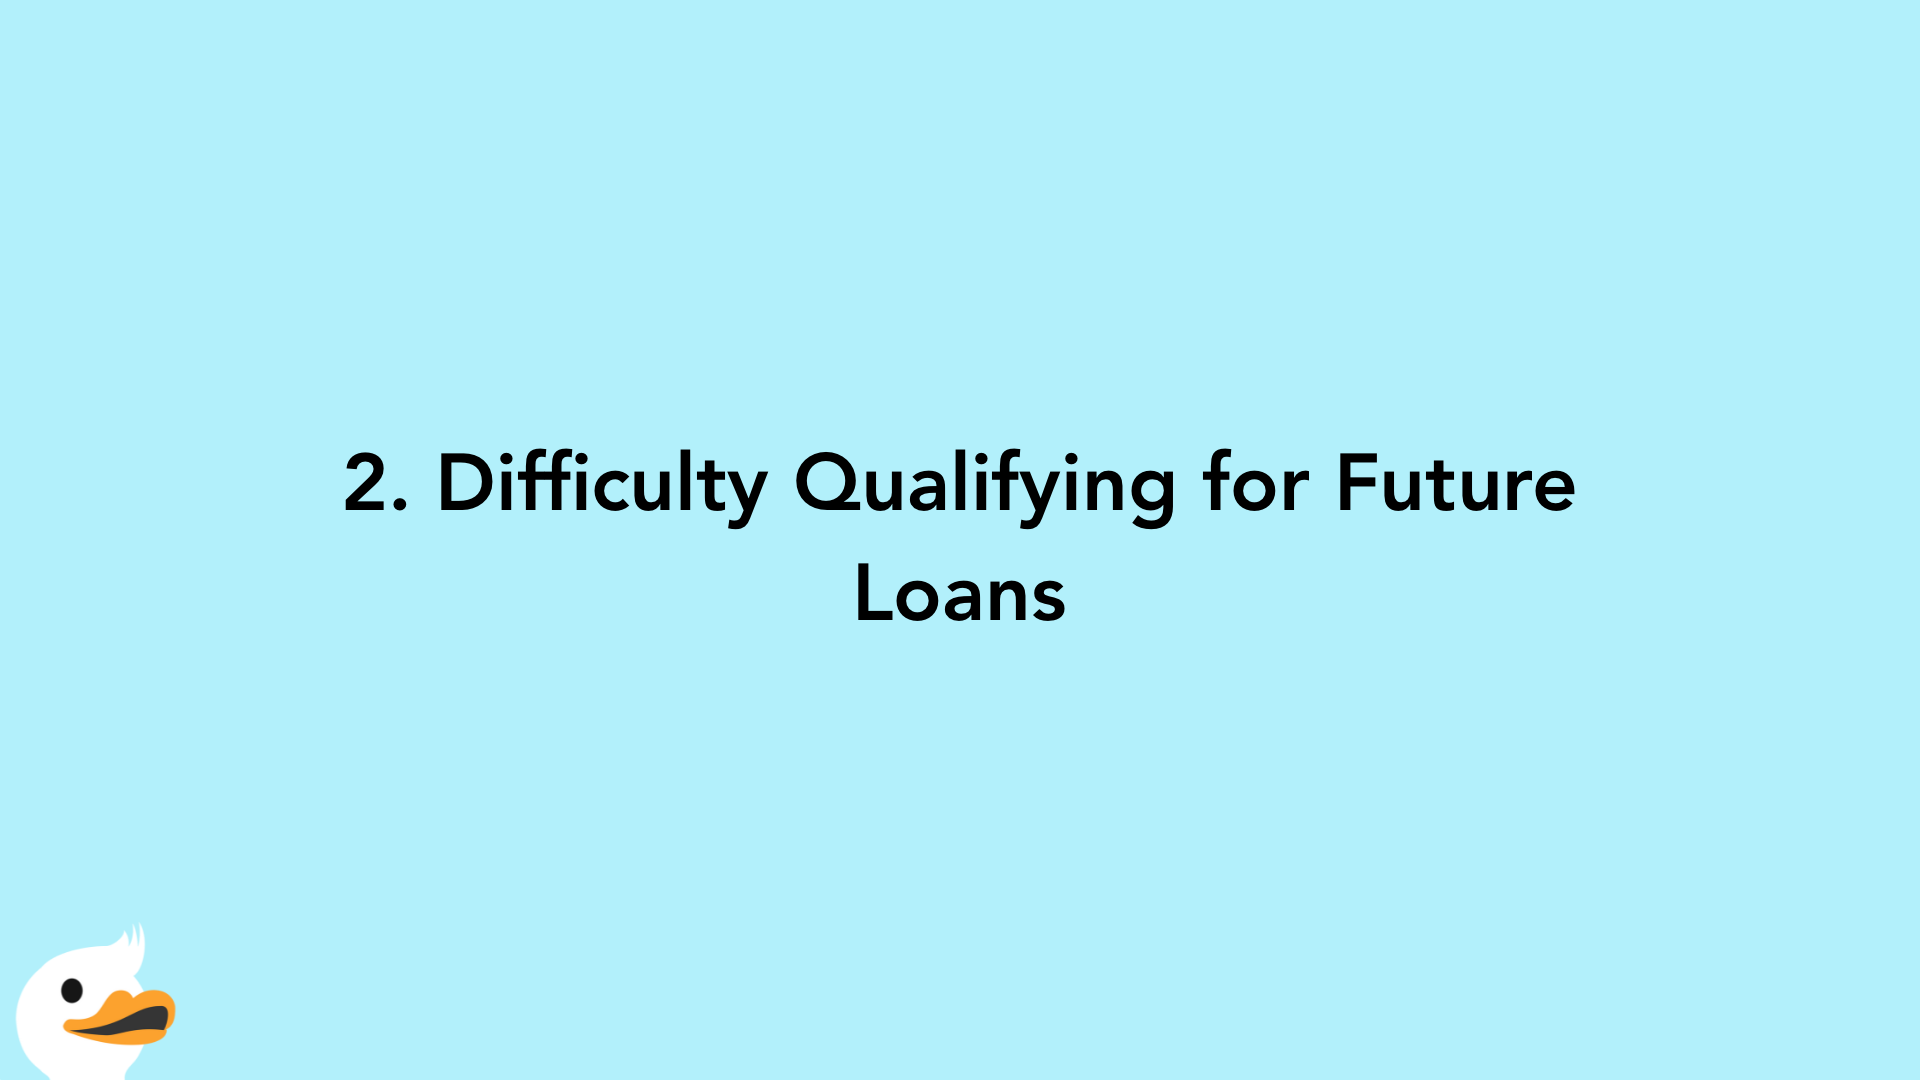 2. Difficulty Qualifying for Future Loans